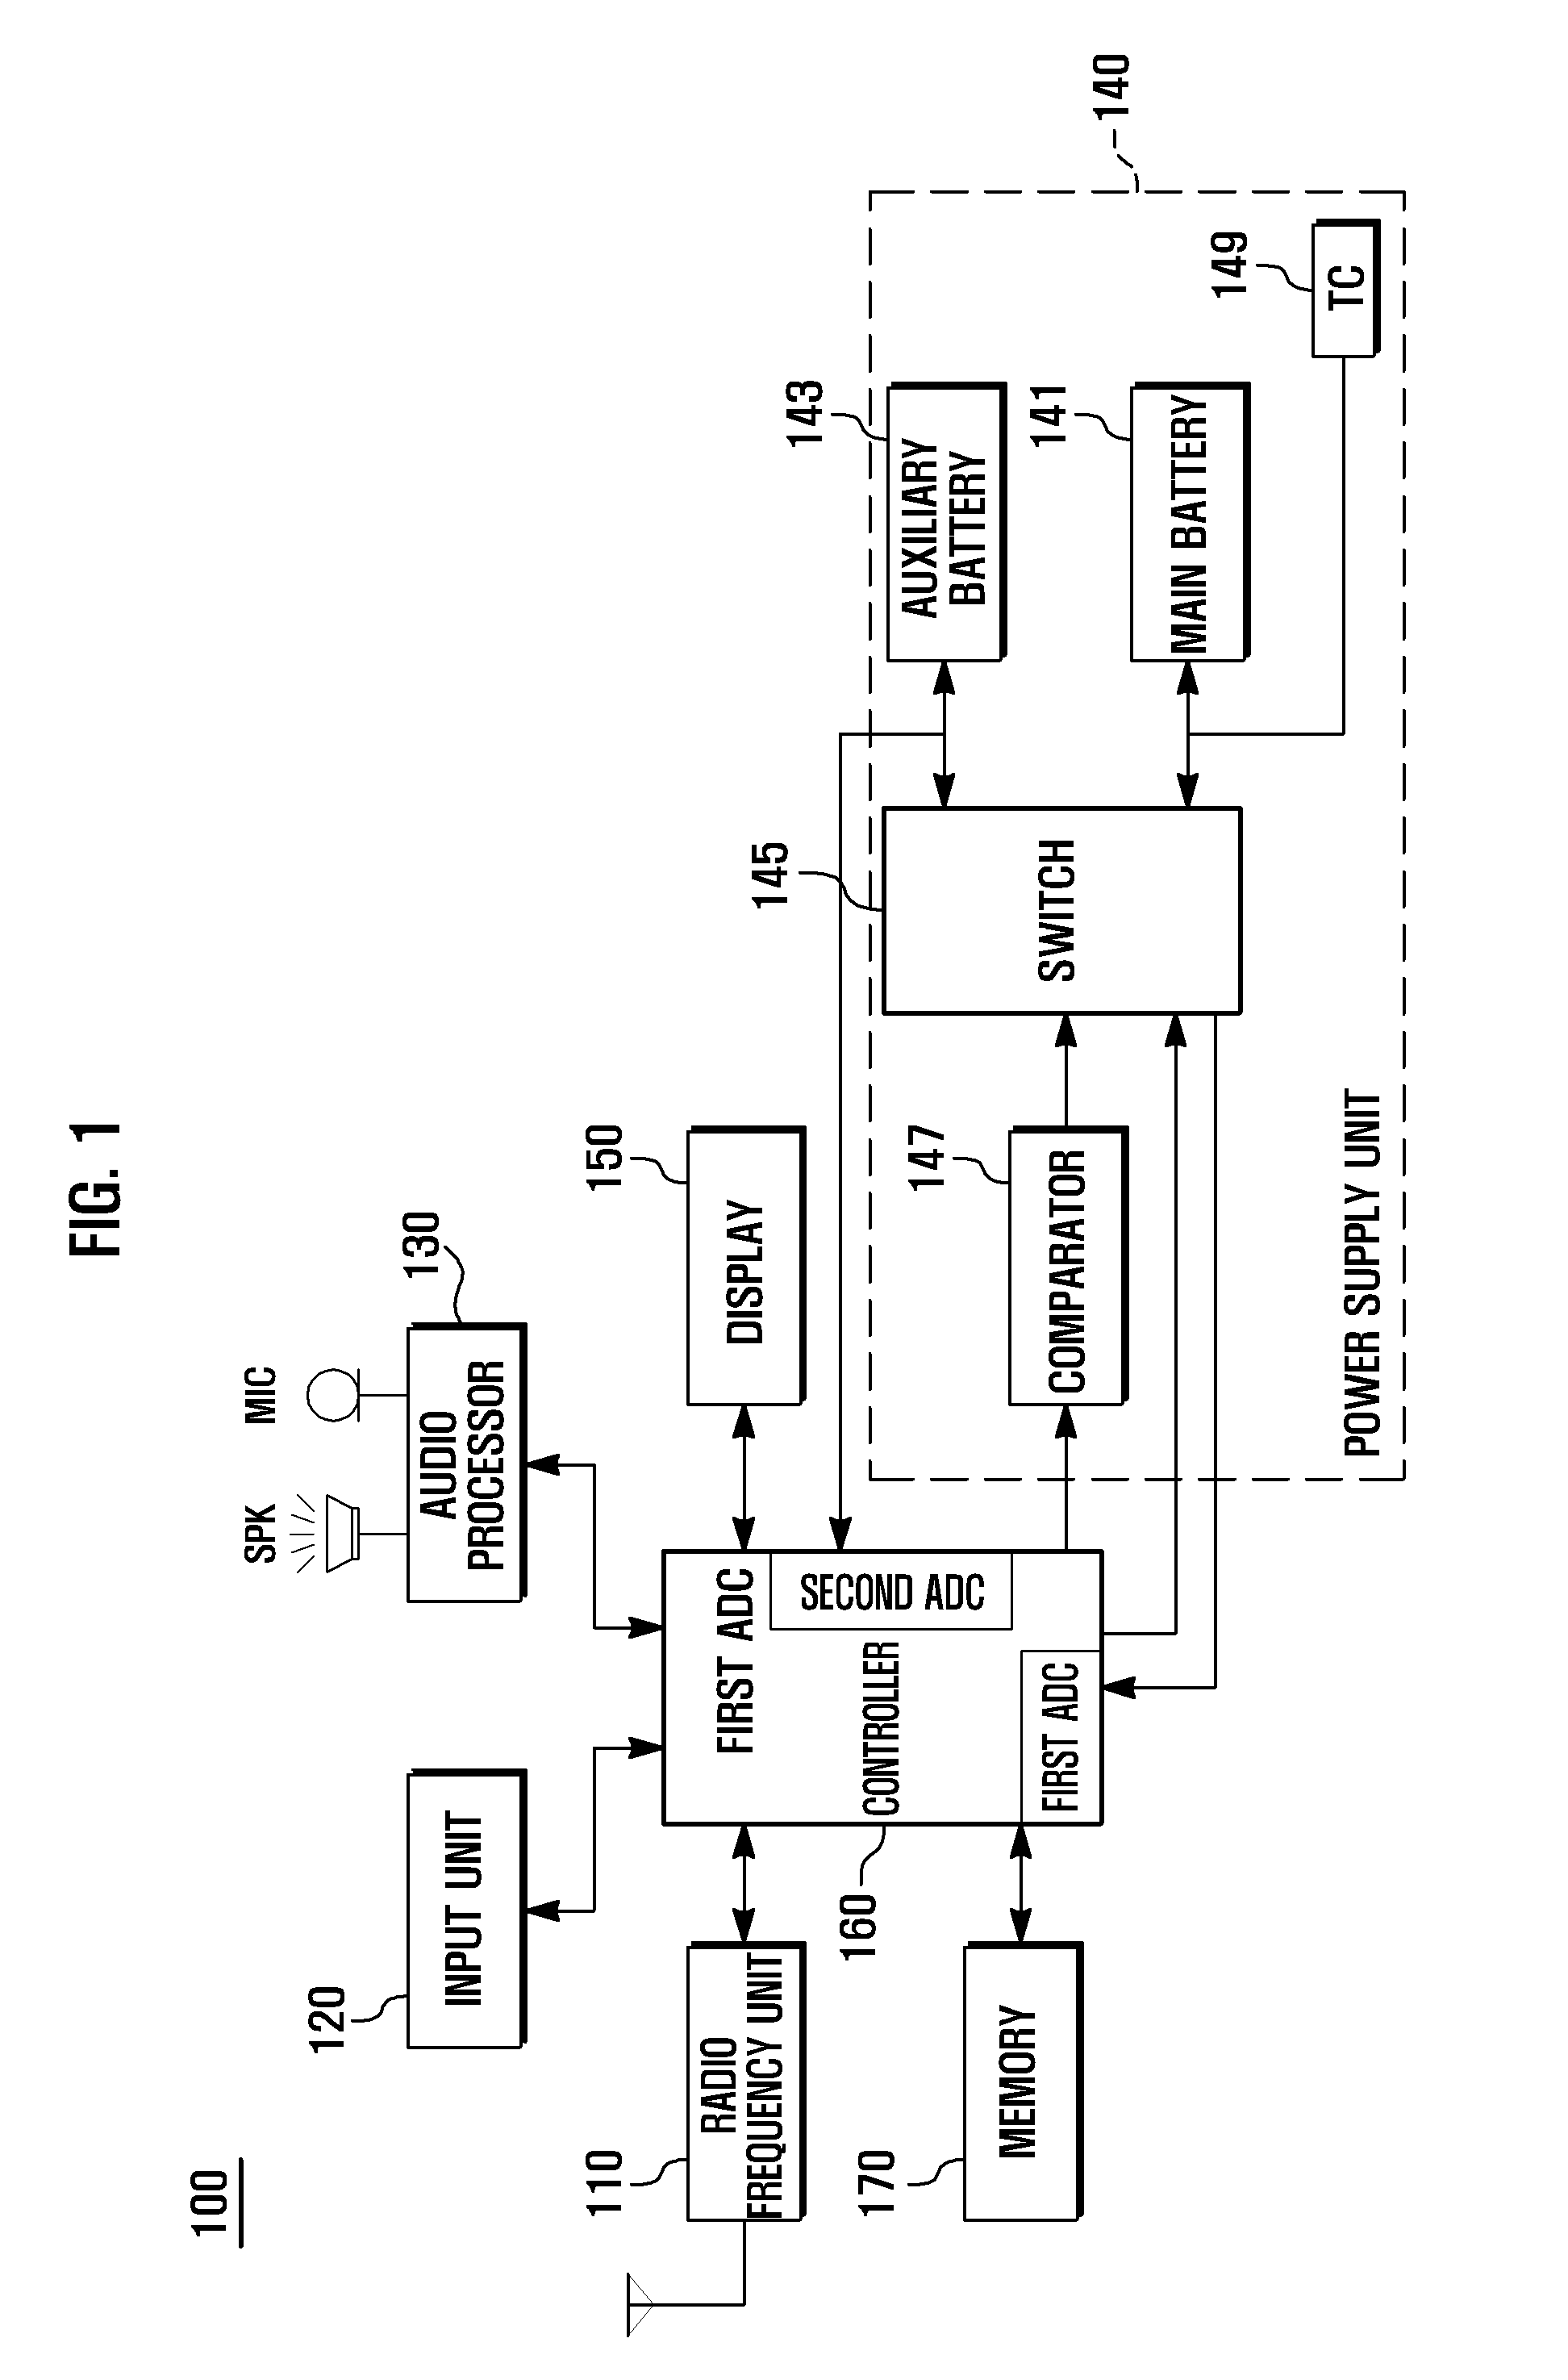 Method of controlling battery power, power control apparatus, and portable device using the same